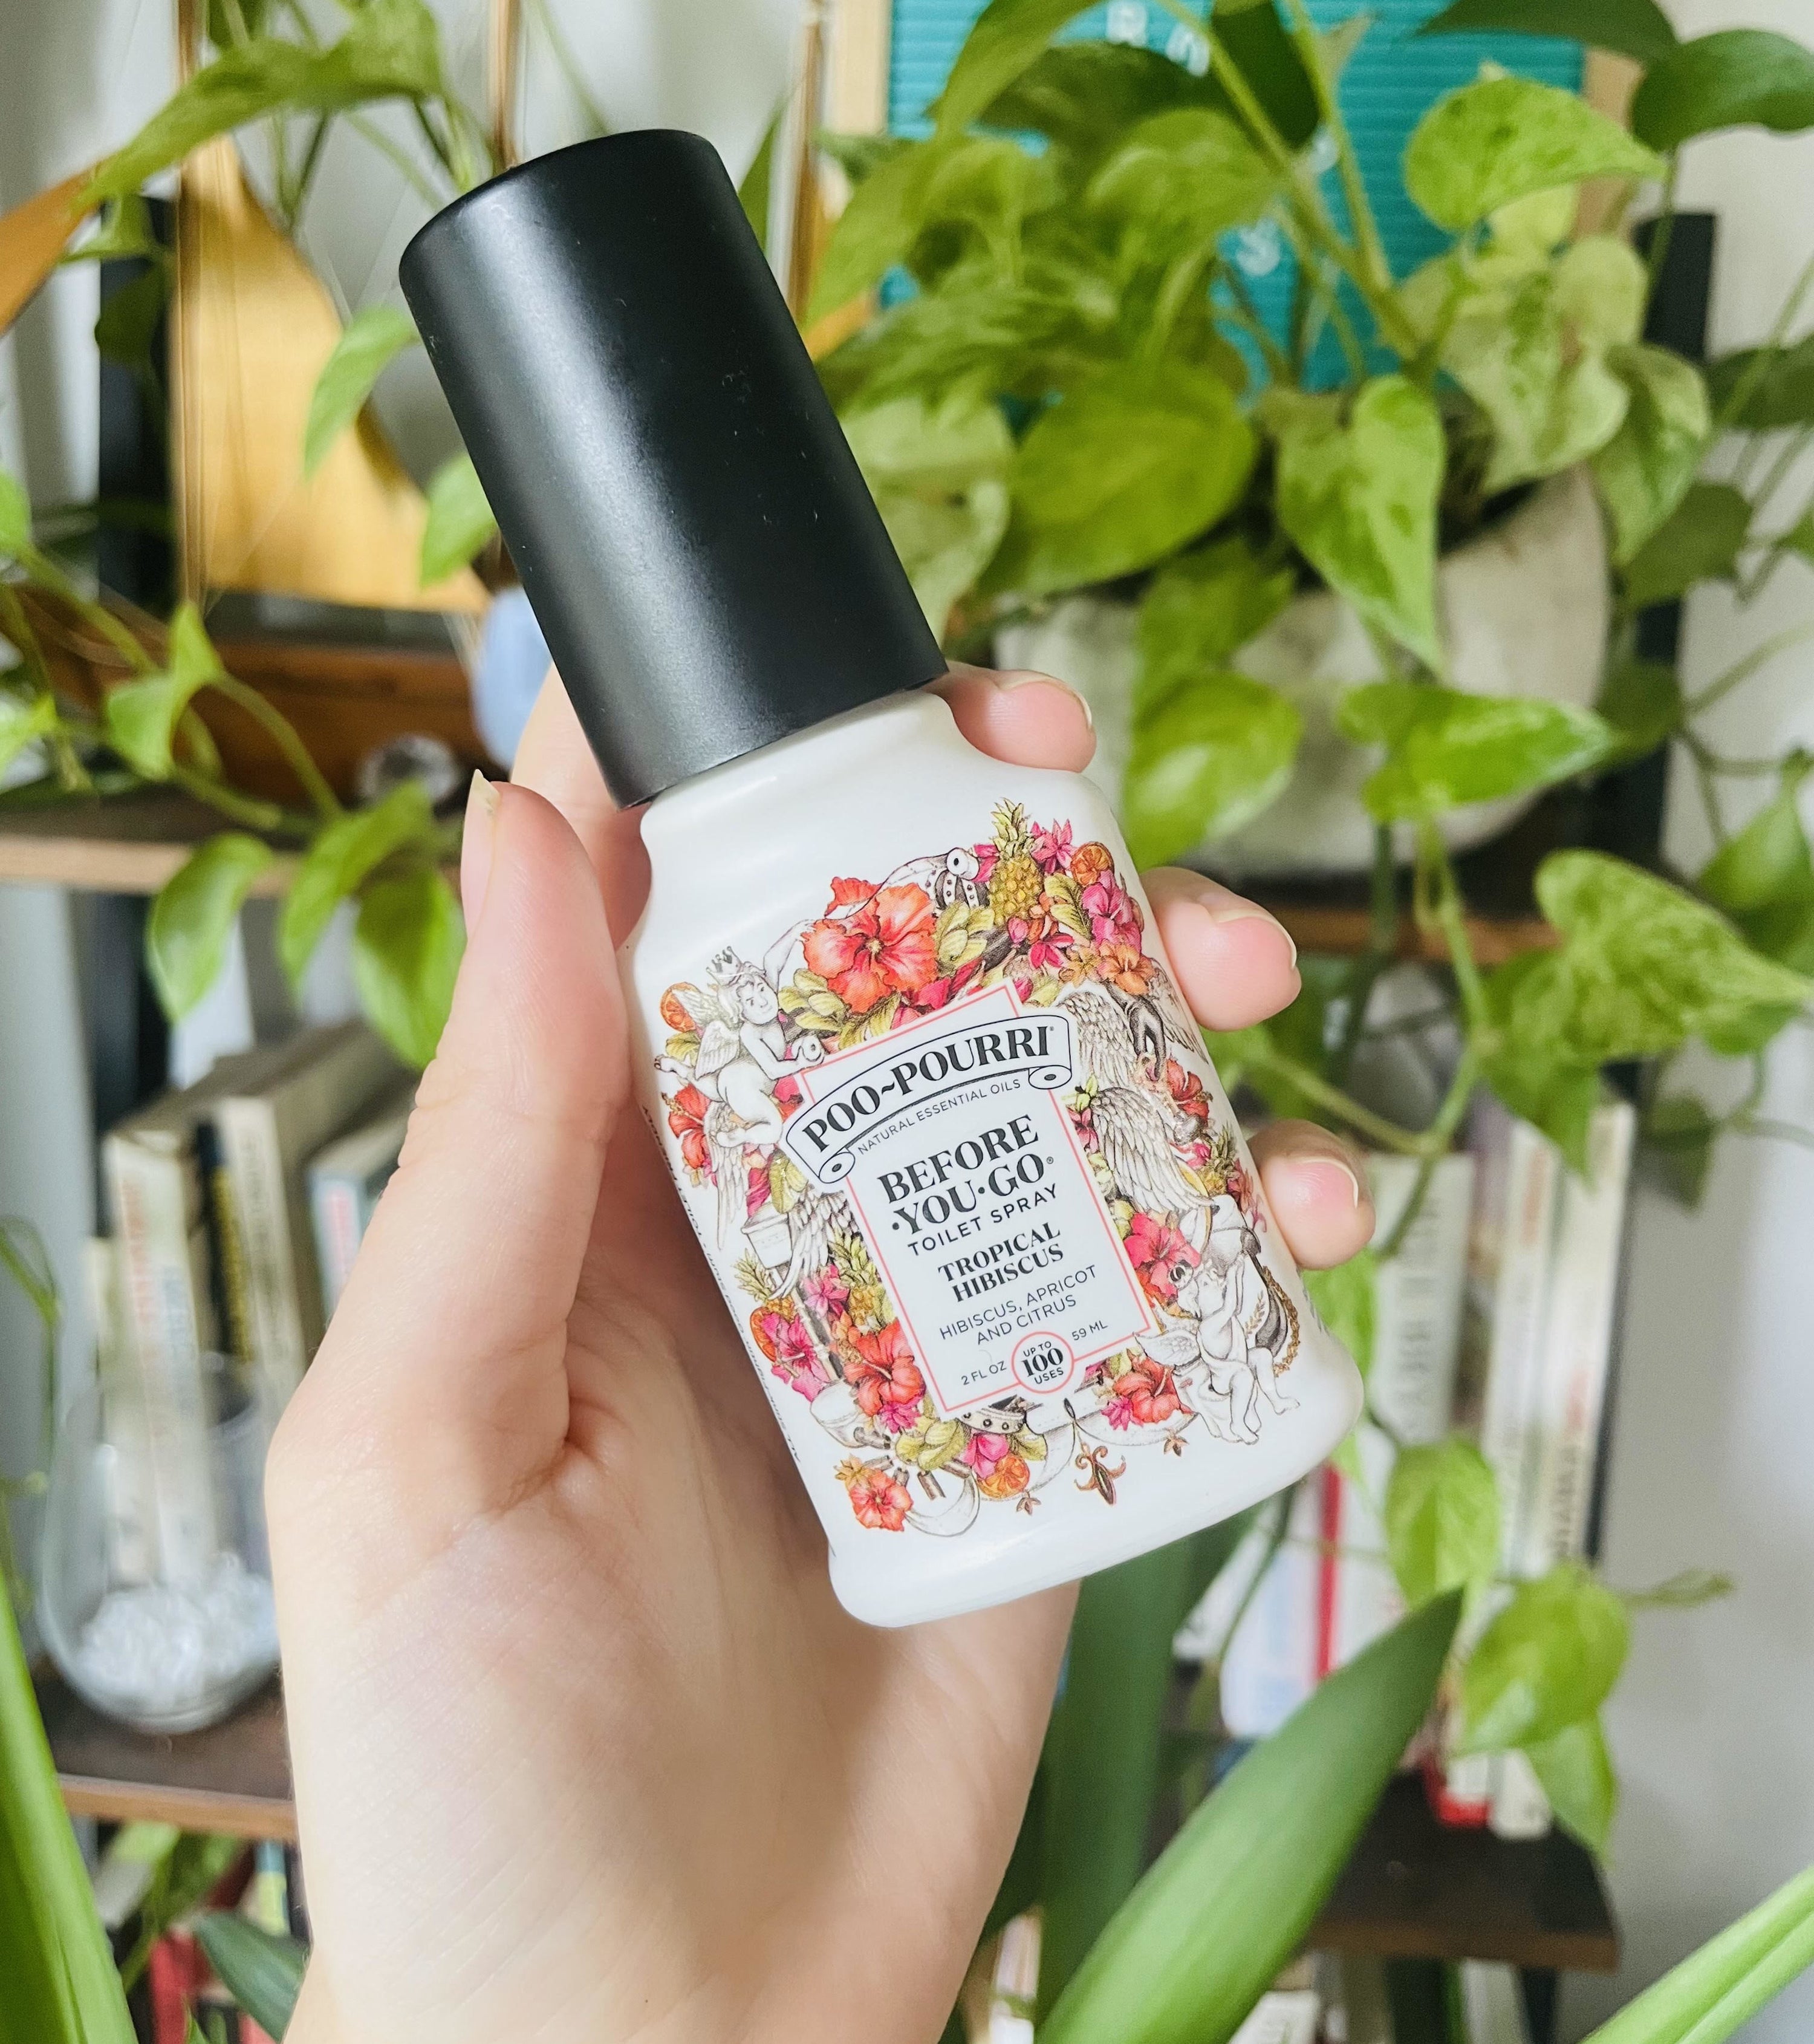 A person holding the bottle of Poo-Pourri spray